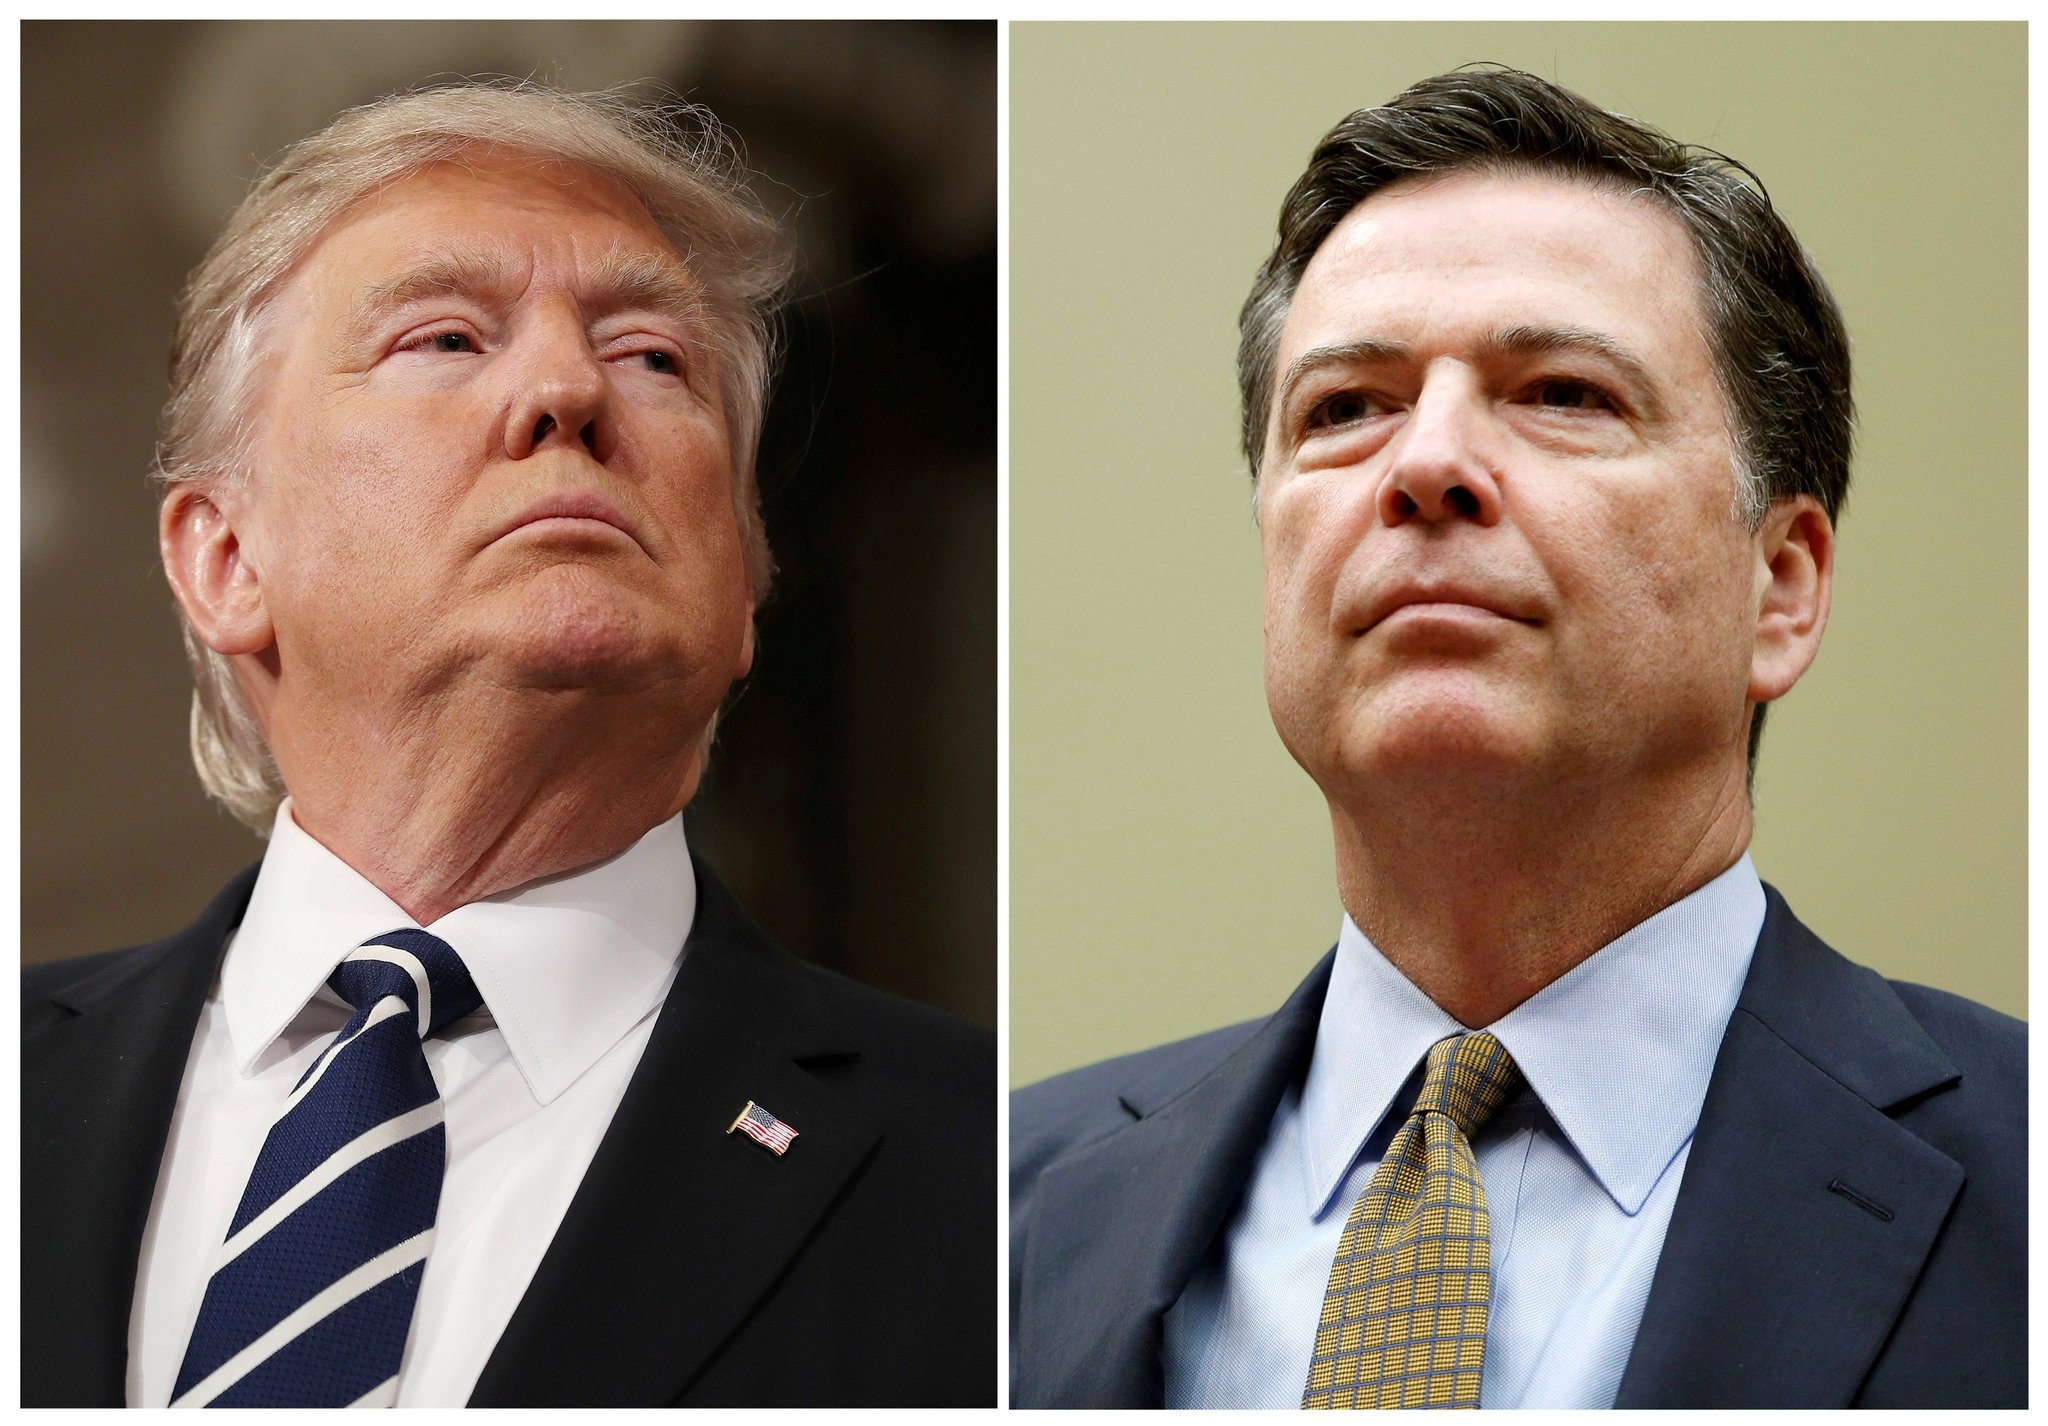  A combination photo shows U.S. President Donald Trump (L) in the House of Representatives in Washington, U.S., on February 28, 2017 and FBI Director James Comey in Washington U.S. on July 7, 2016. (REUTERS Photo)